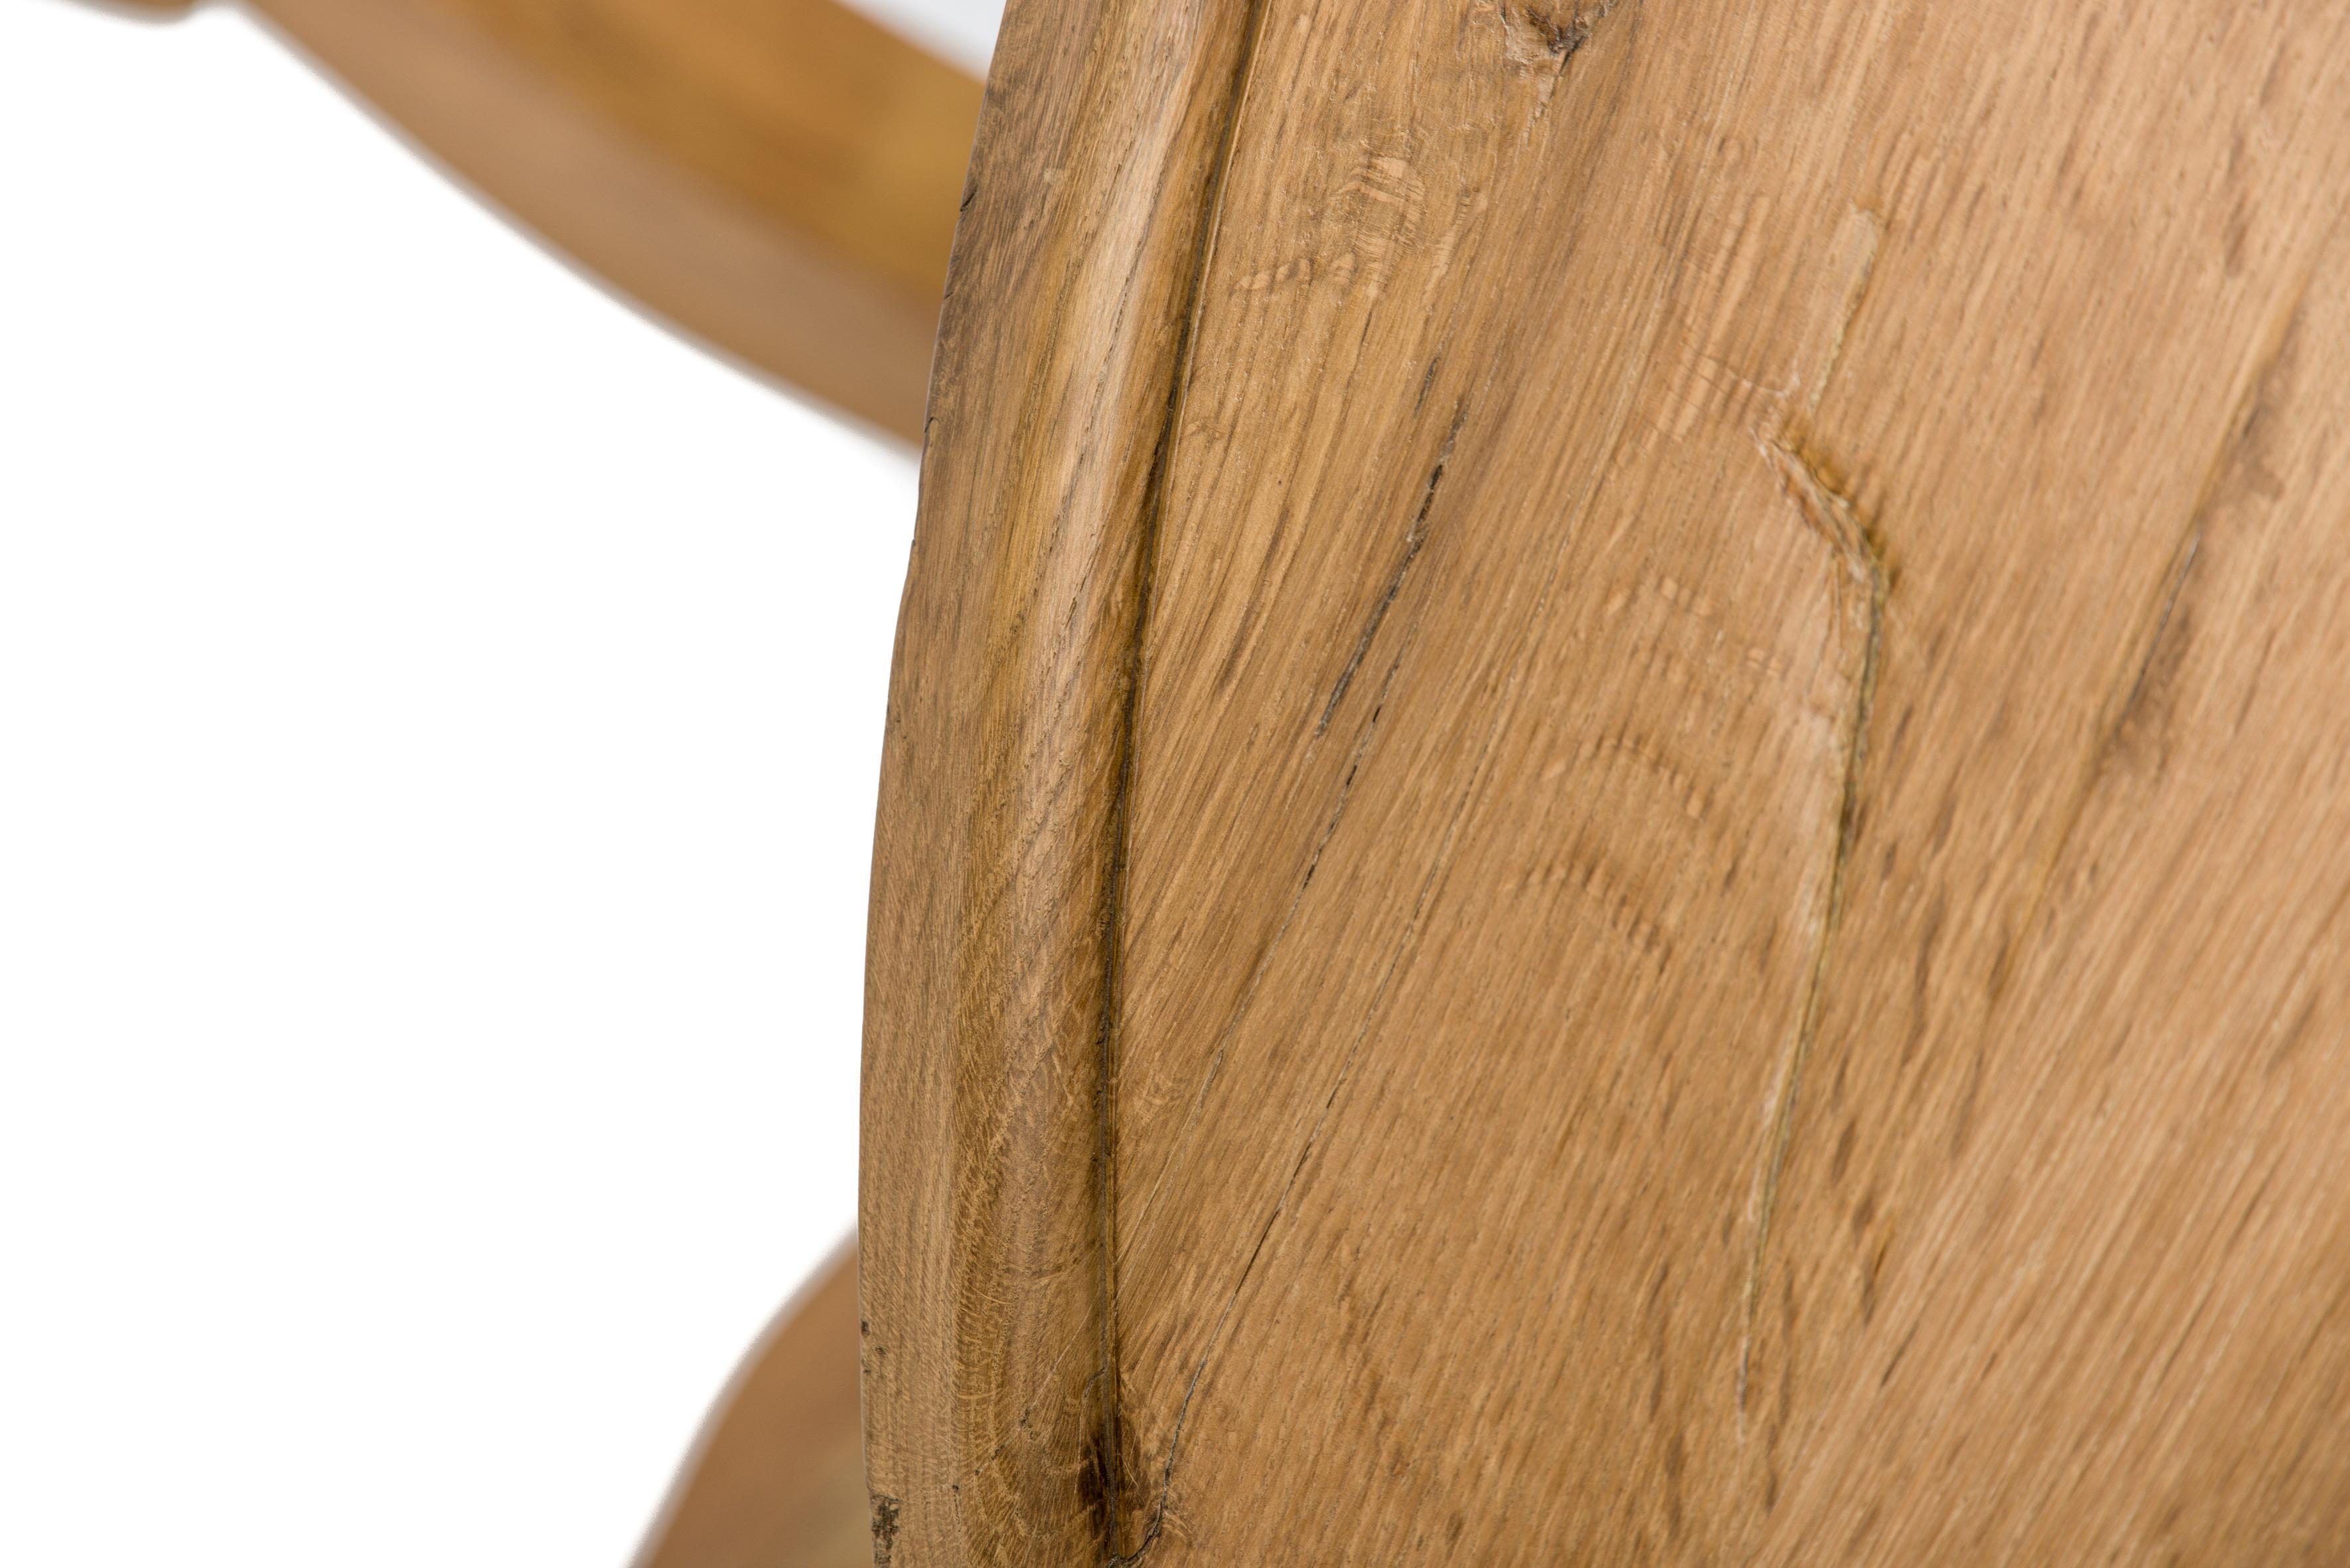 Dutch Bespoke Rustic Solid Aged Oak Round Dining Table in Natural Matt Finish